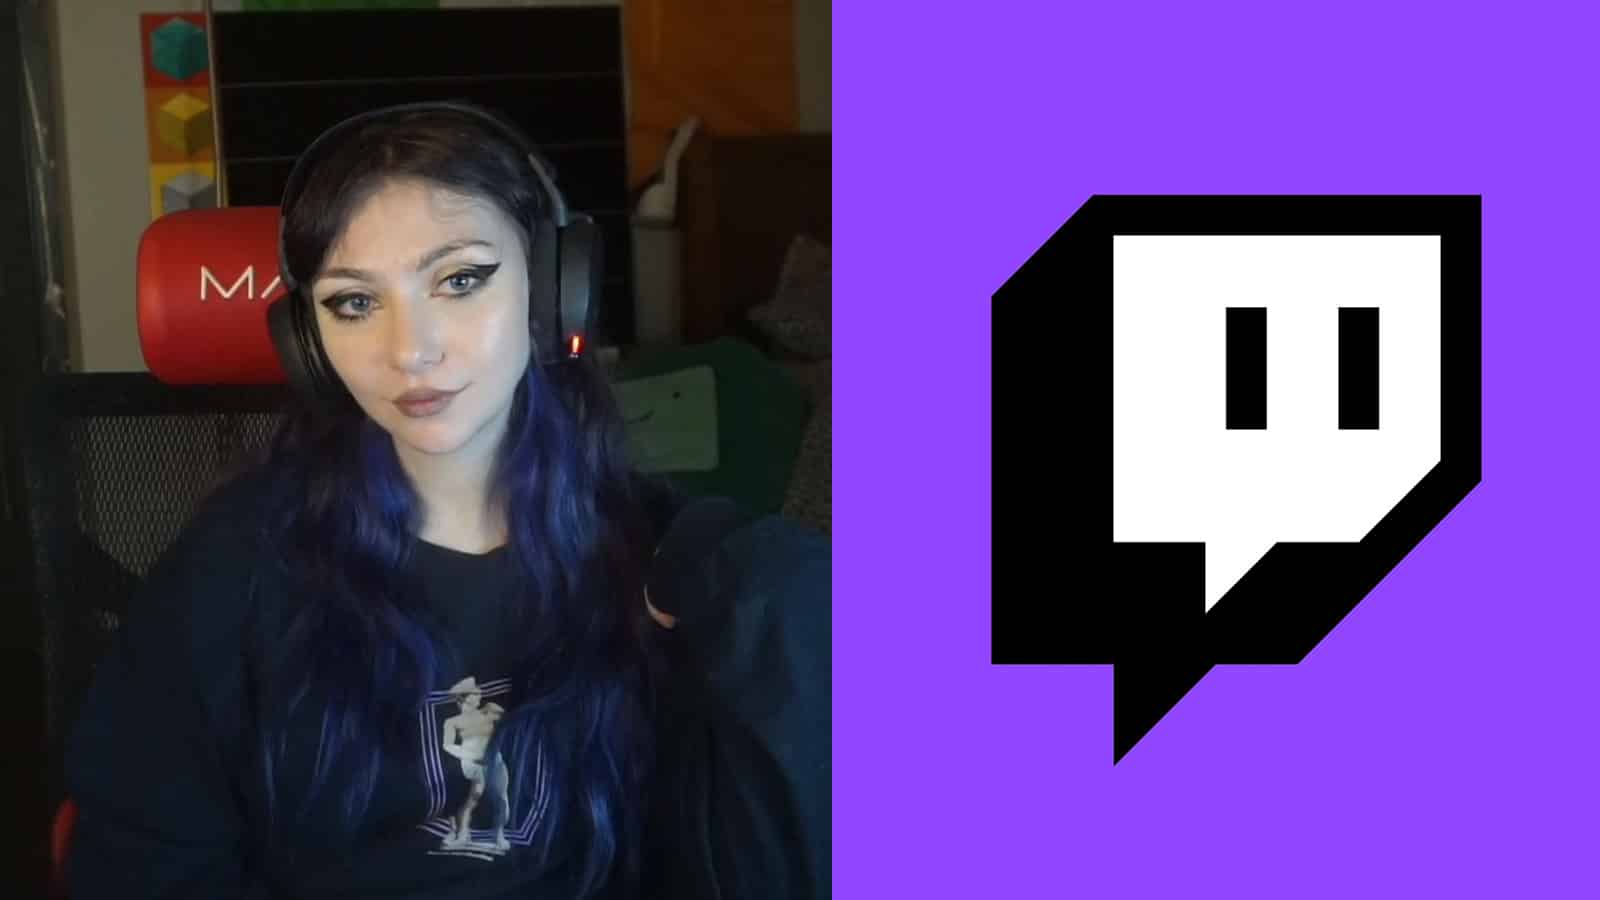 JustaMinx says AirBnB banned her account after home invasion - Dexerto